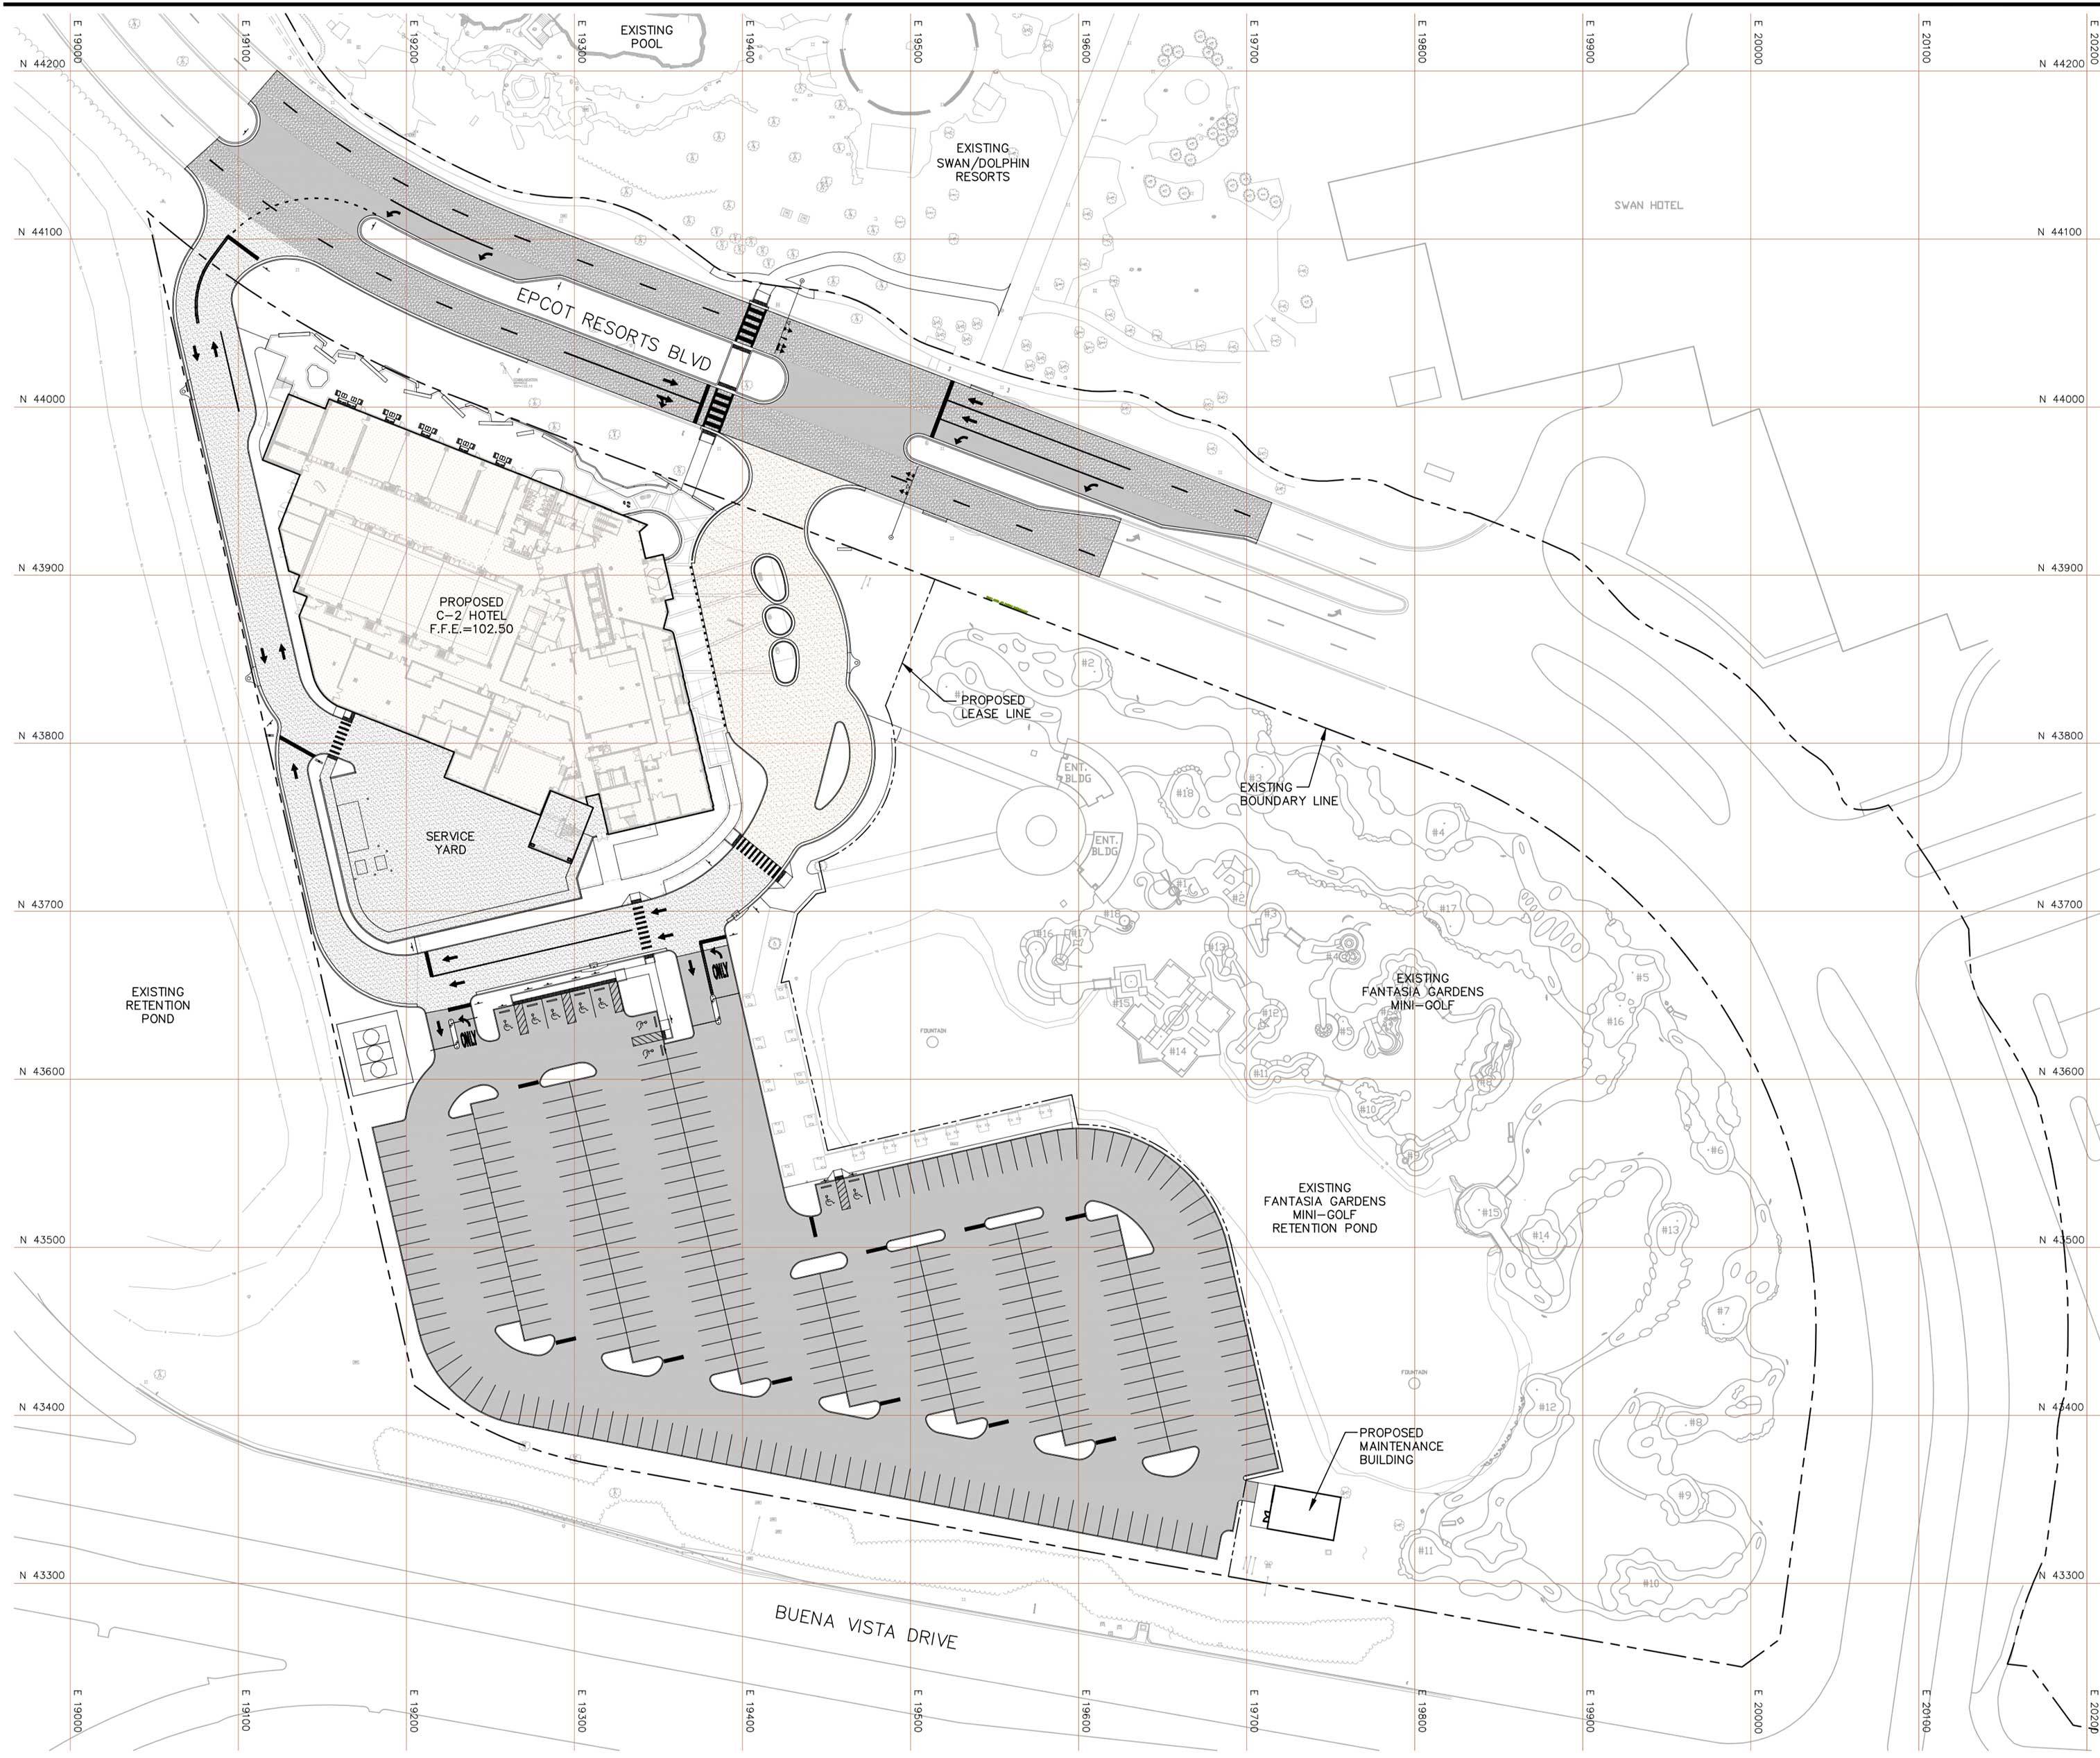 Plans filed for the new Walt Disney World Swan and Dolphin expansion